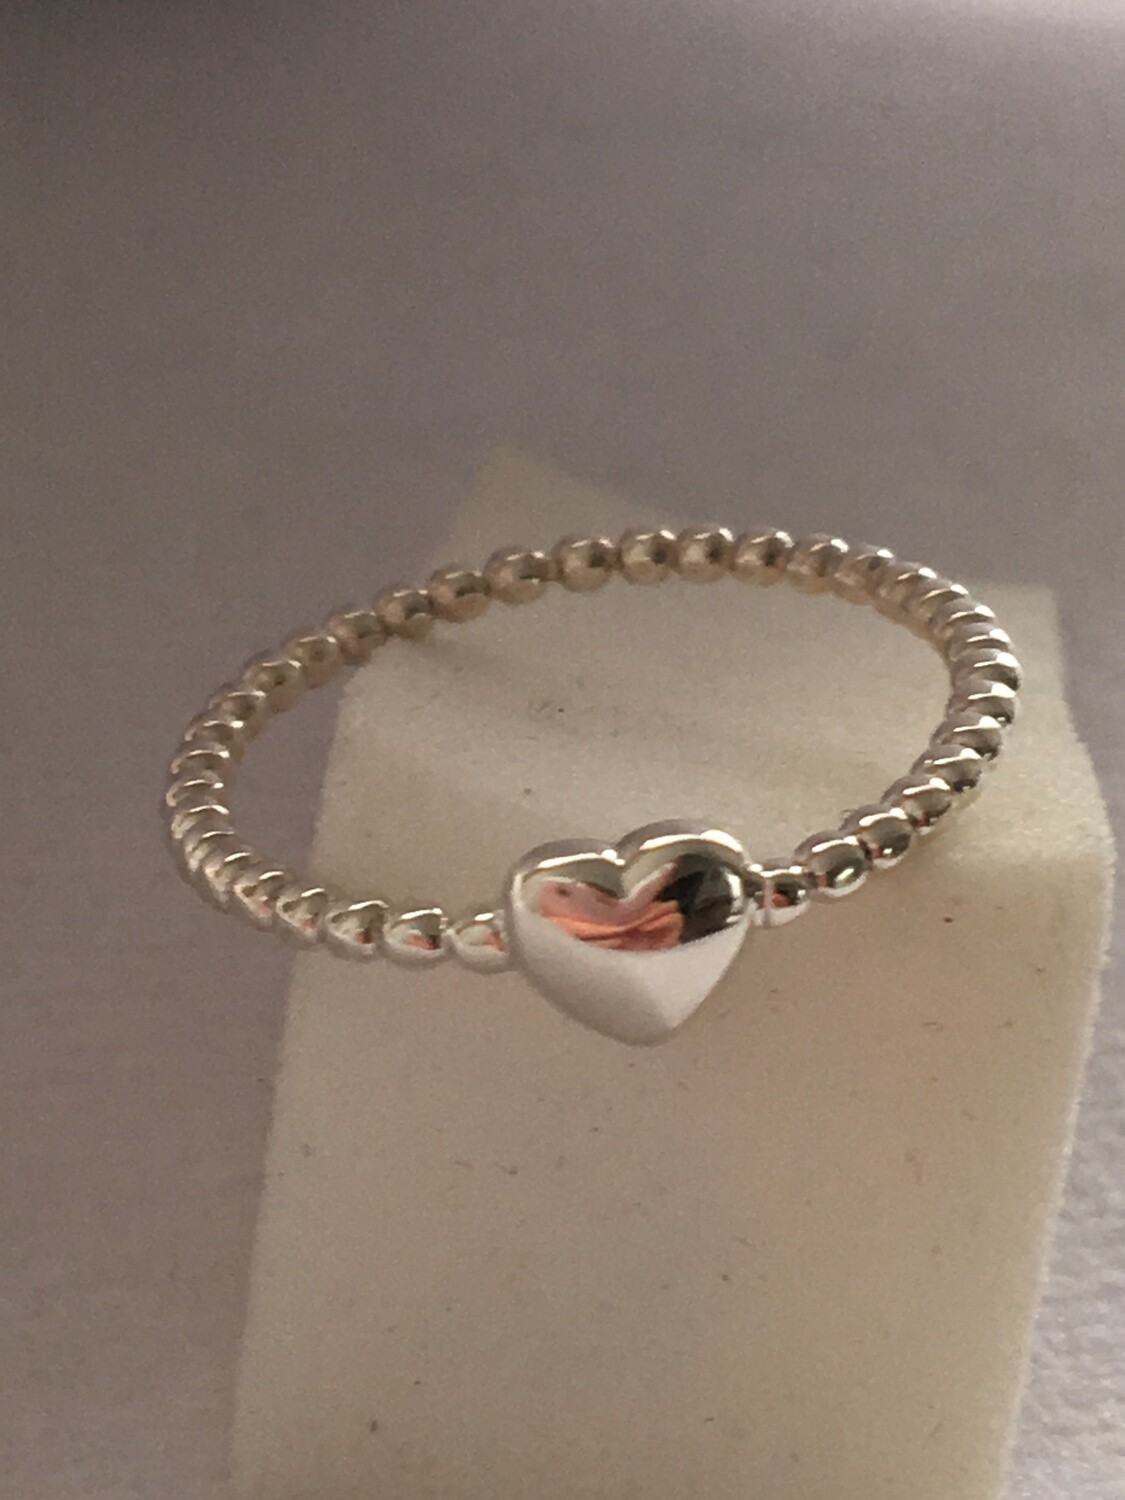 Ball ring band with a cute plump heart